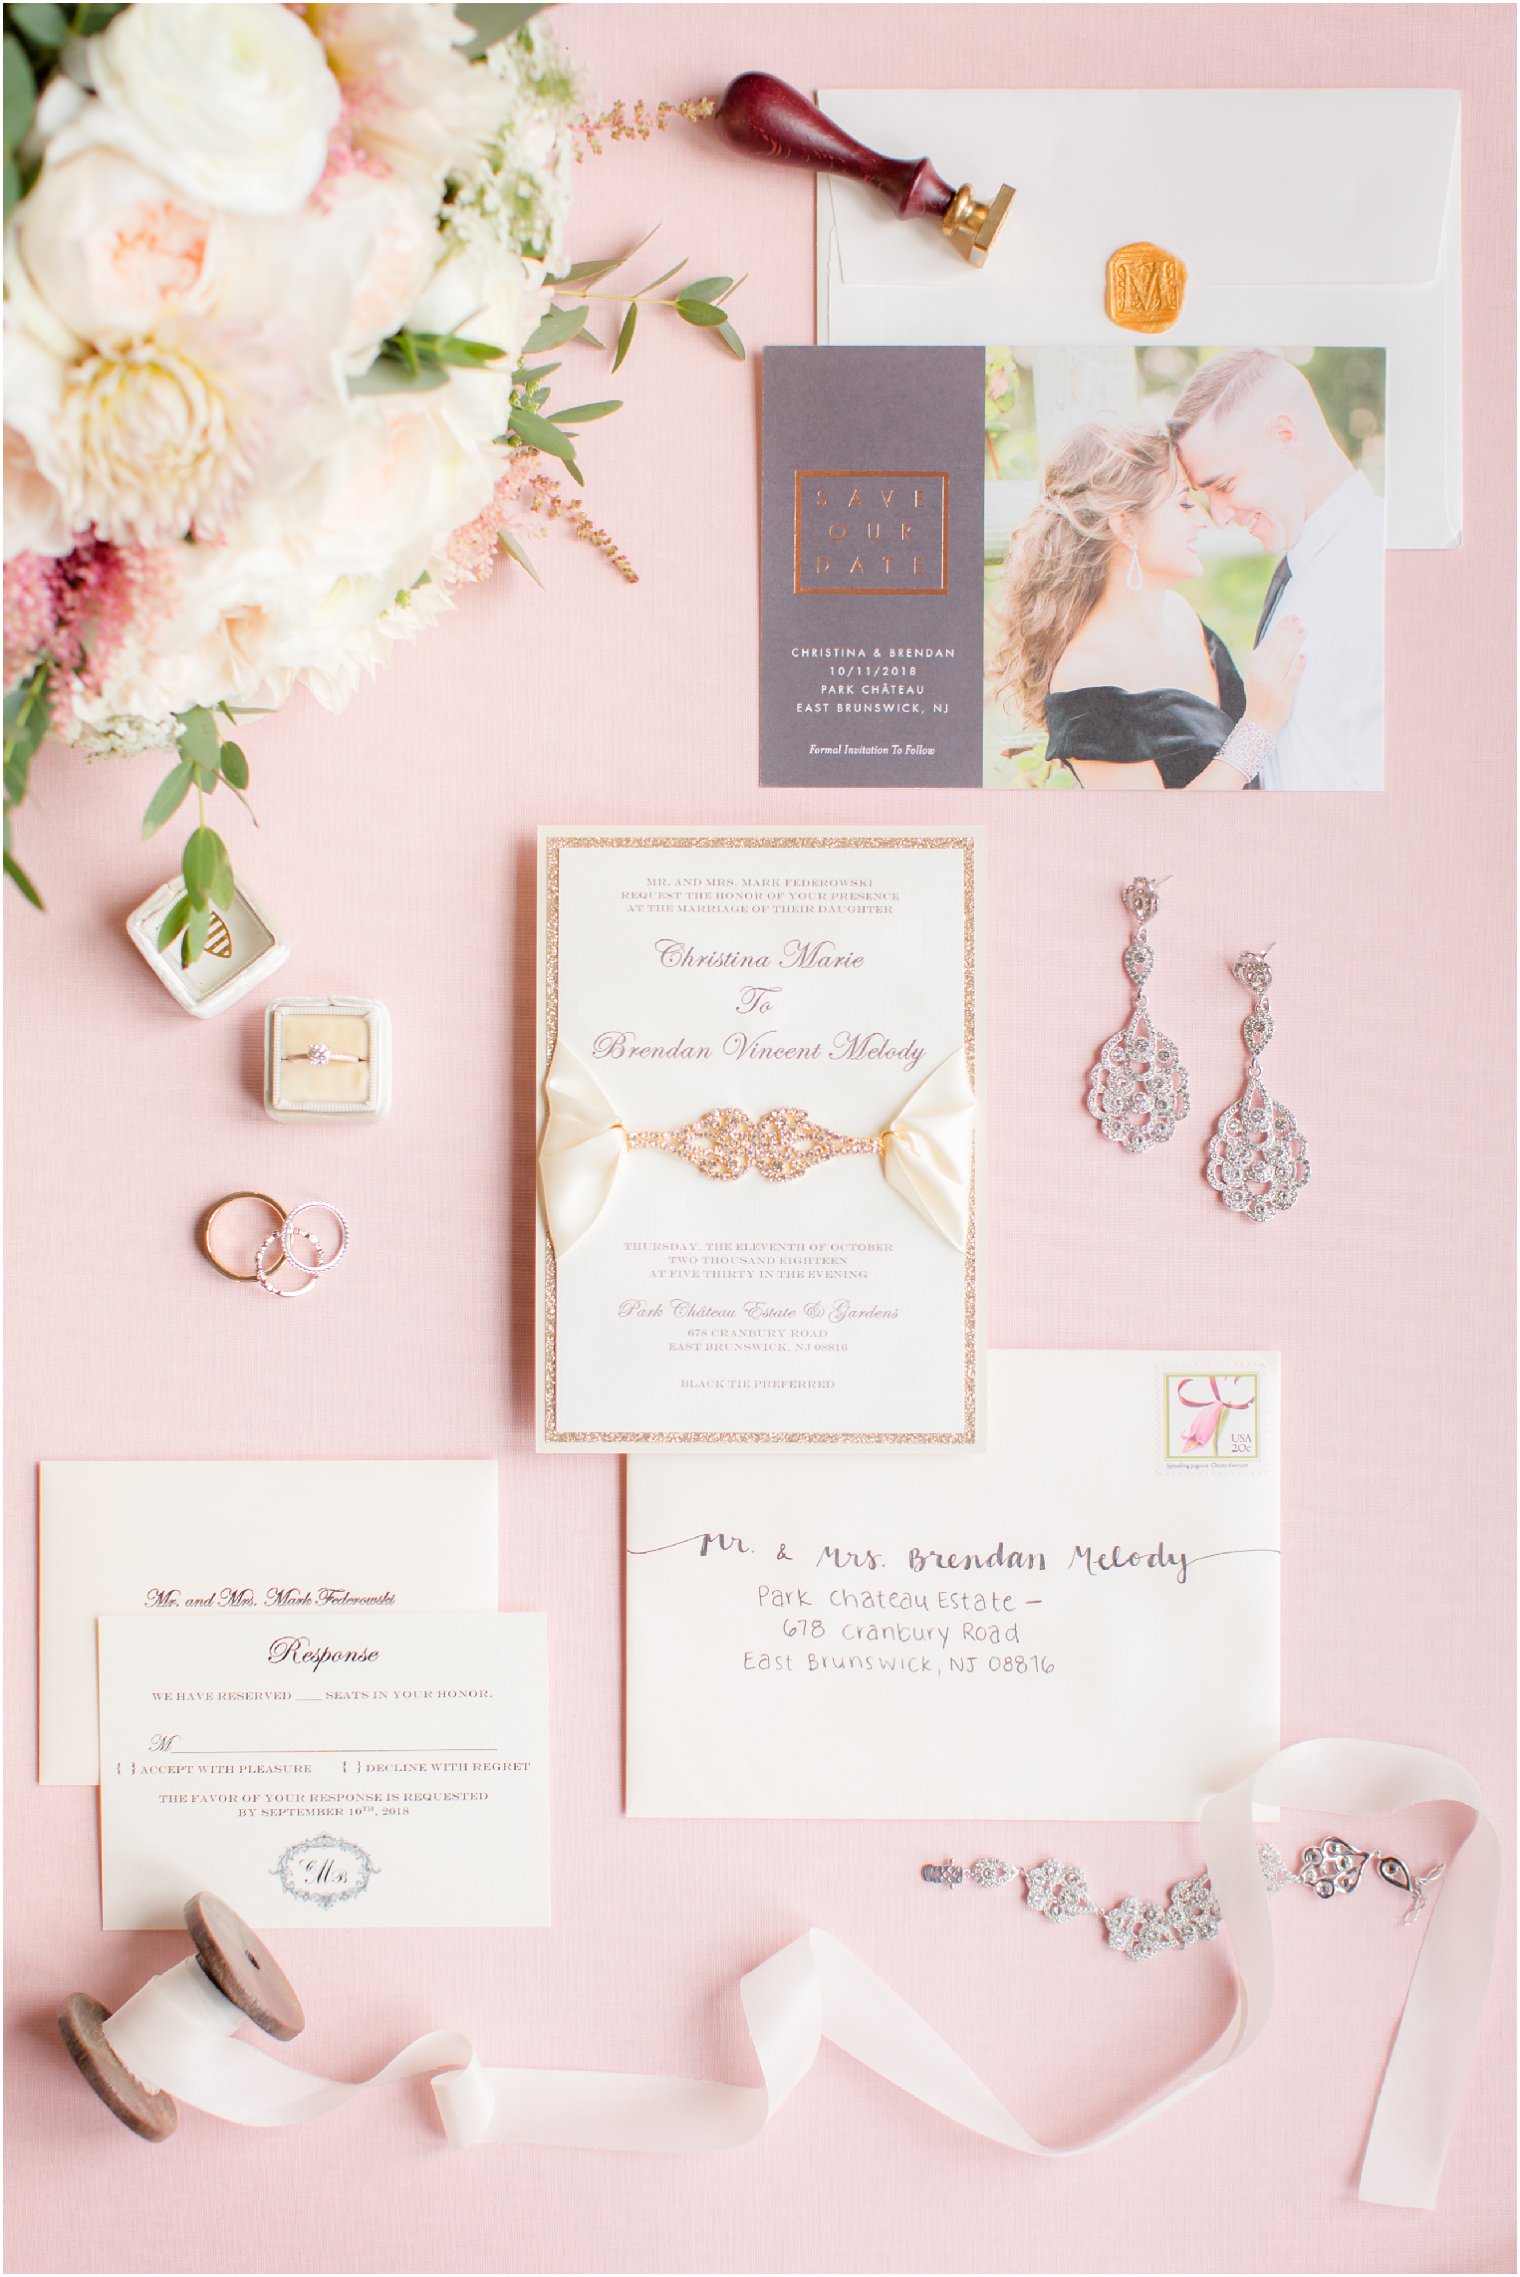 Elegant jeweled wedding invitations by Jeweled Invitations by Ink and Love